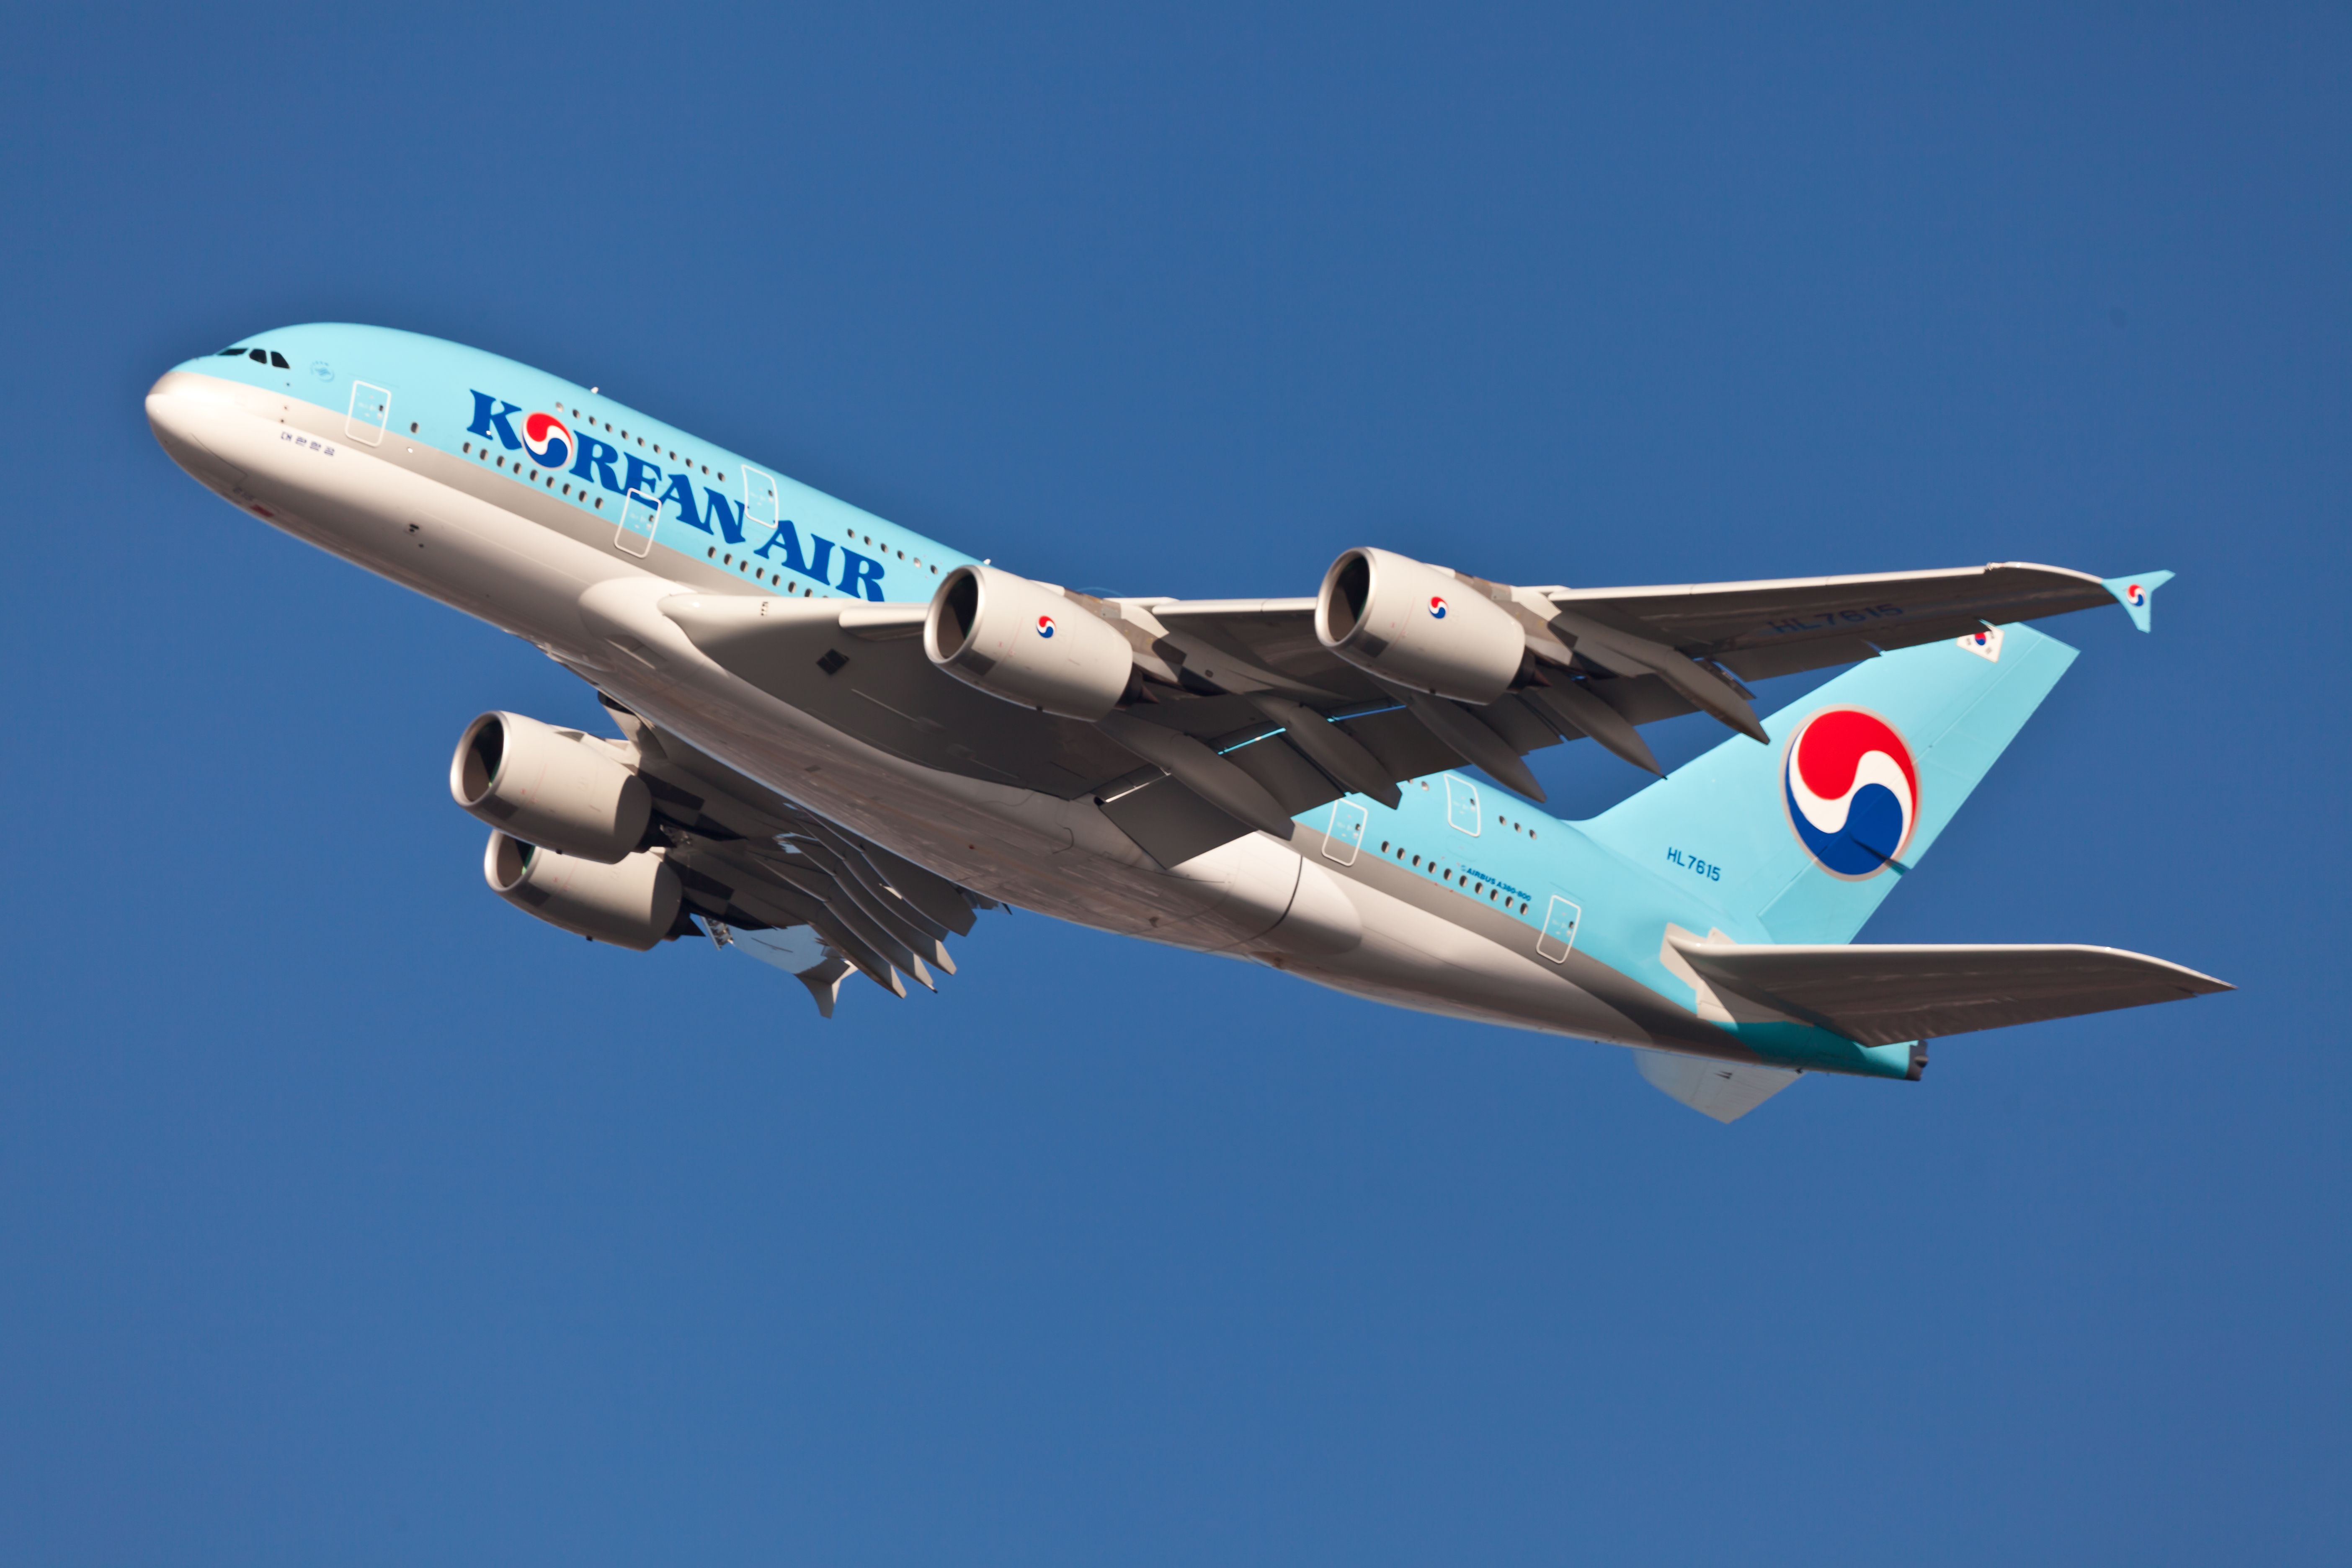 Korean Air Airbus A380-800 taking off from New York JFK Airport